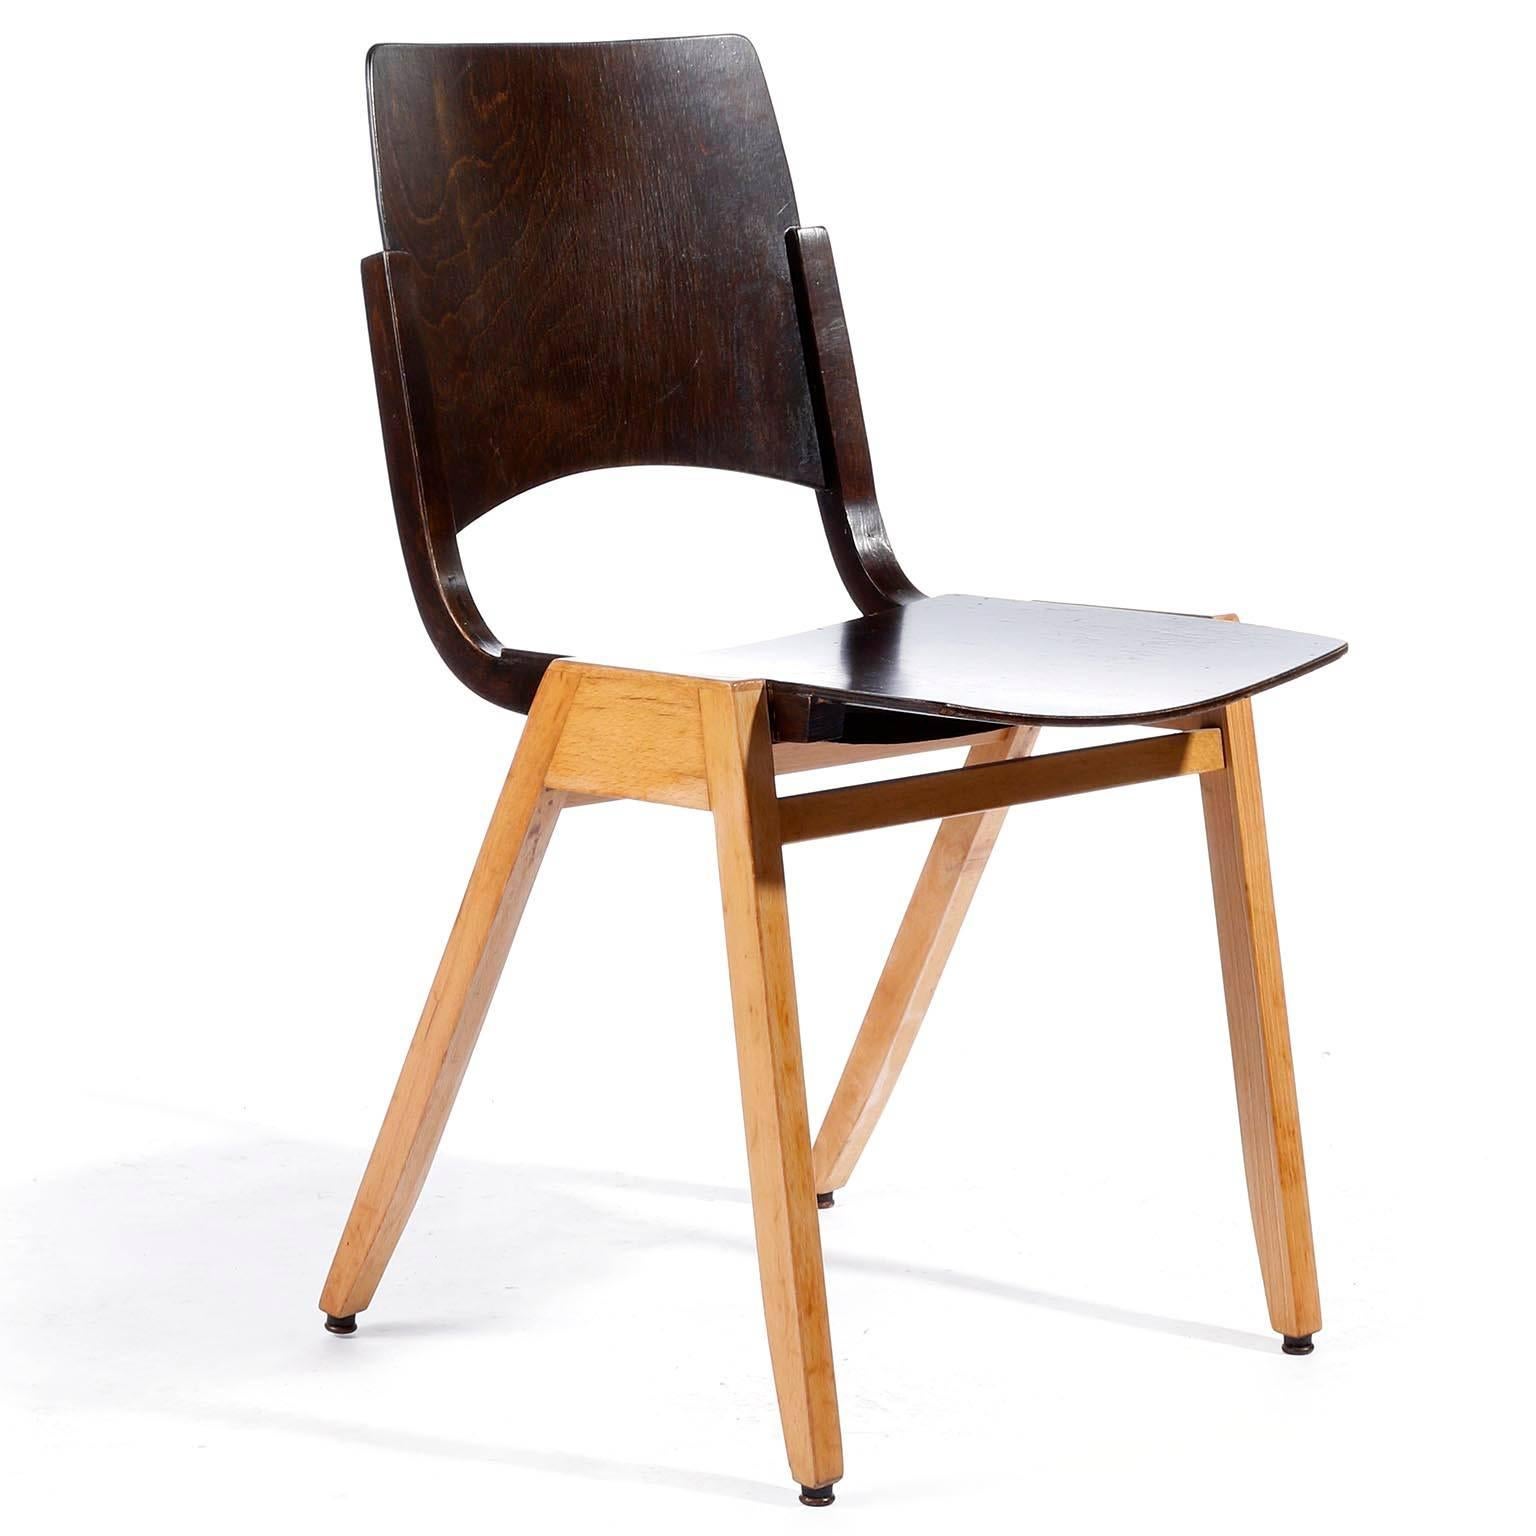 Stained Roland Rainer, Set of Eight Stacking Chairs P7, Bicolored Beech, Austria, 1952 For Sale